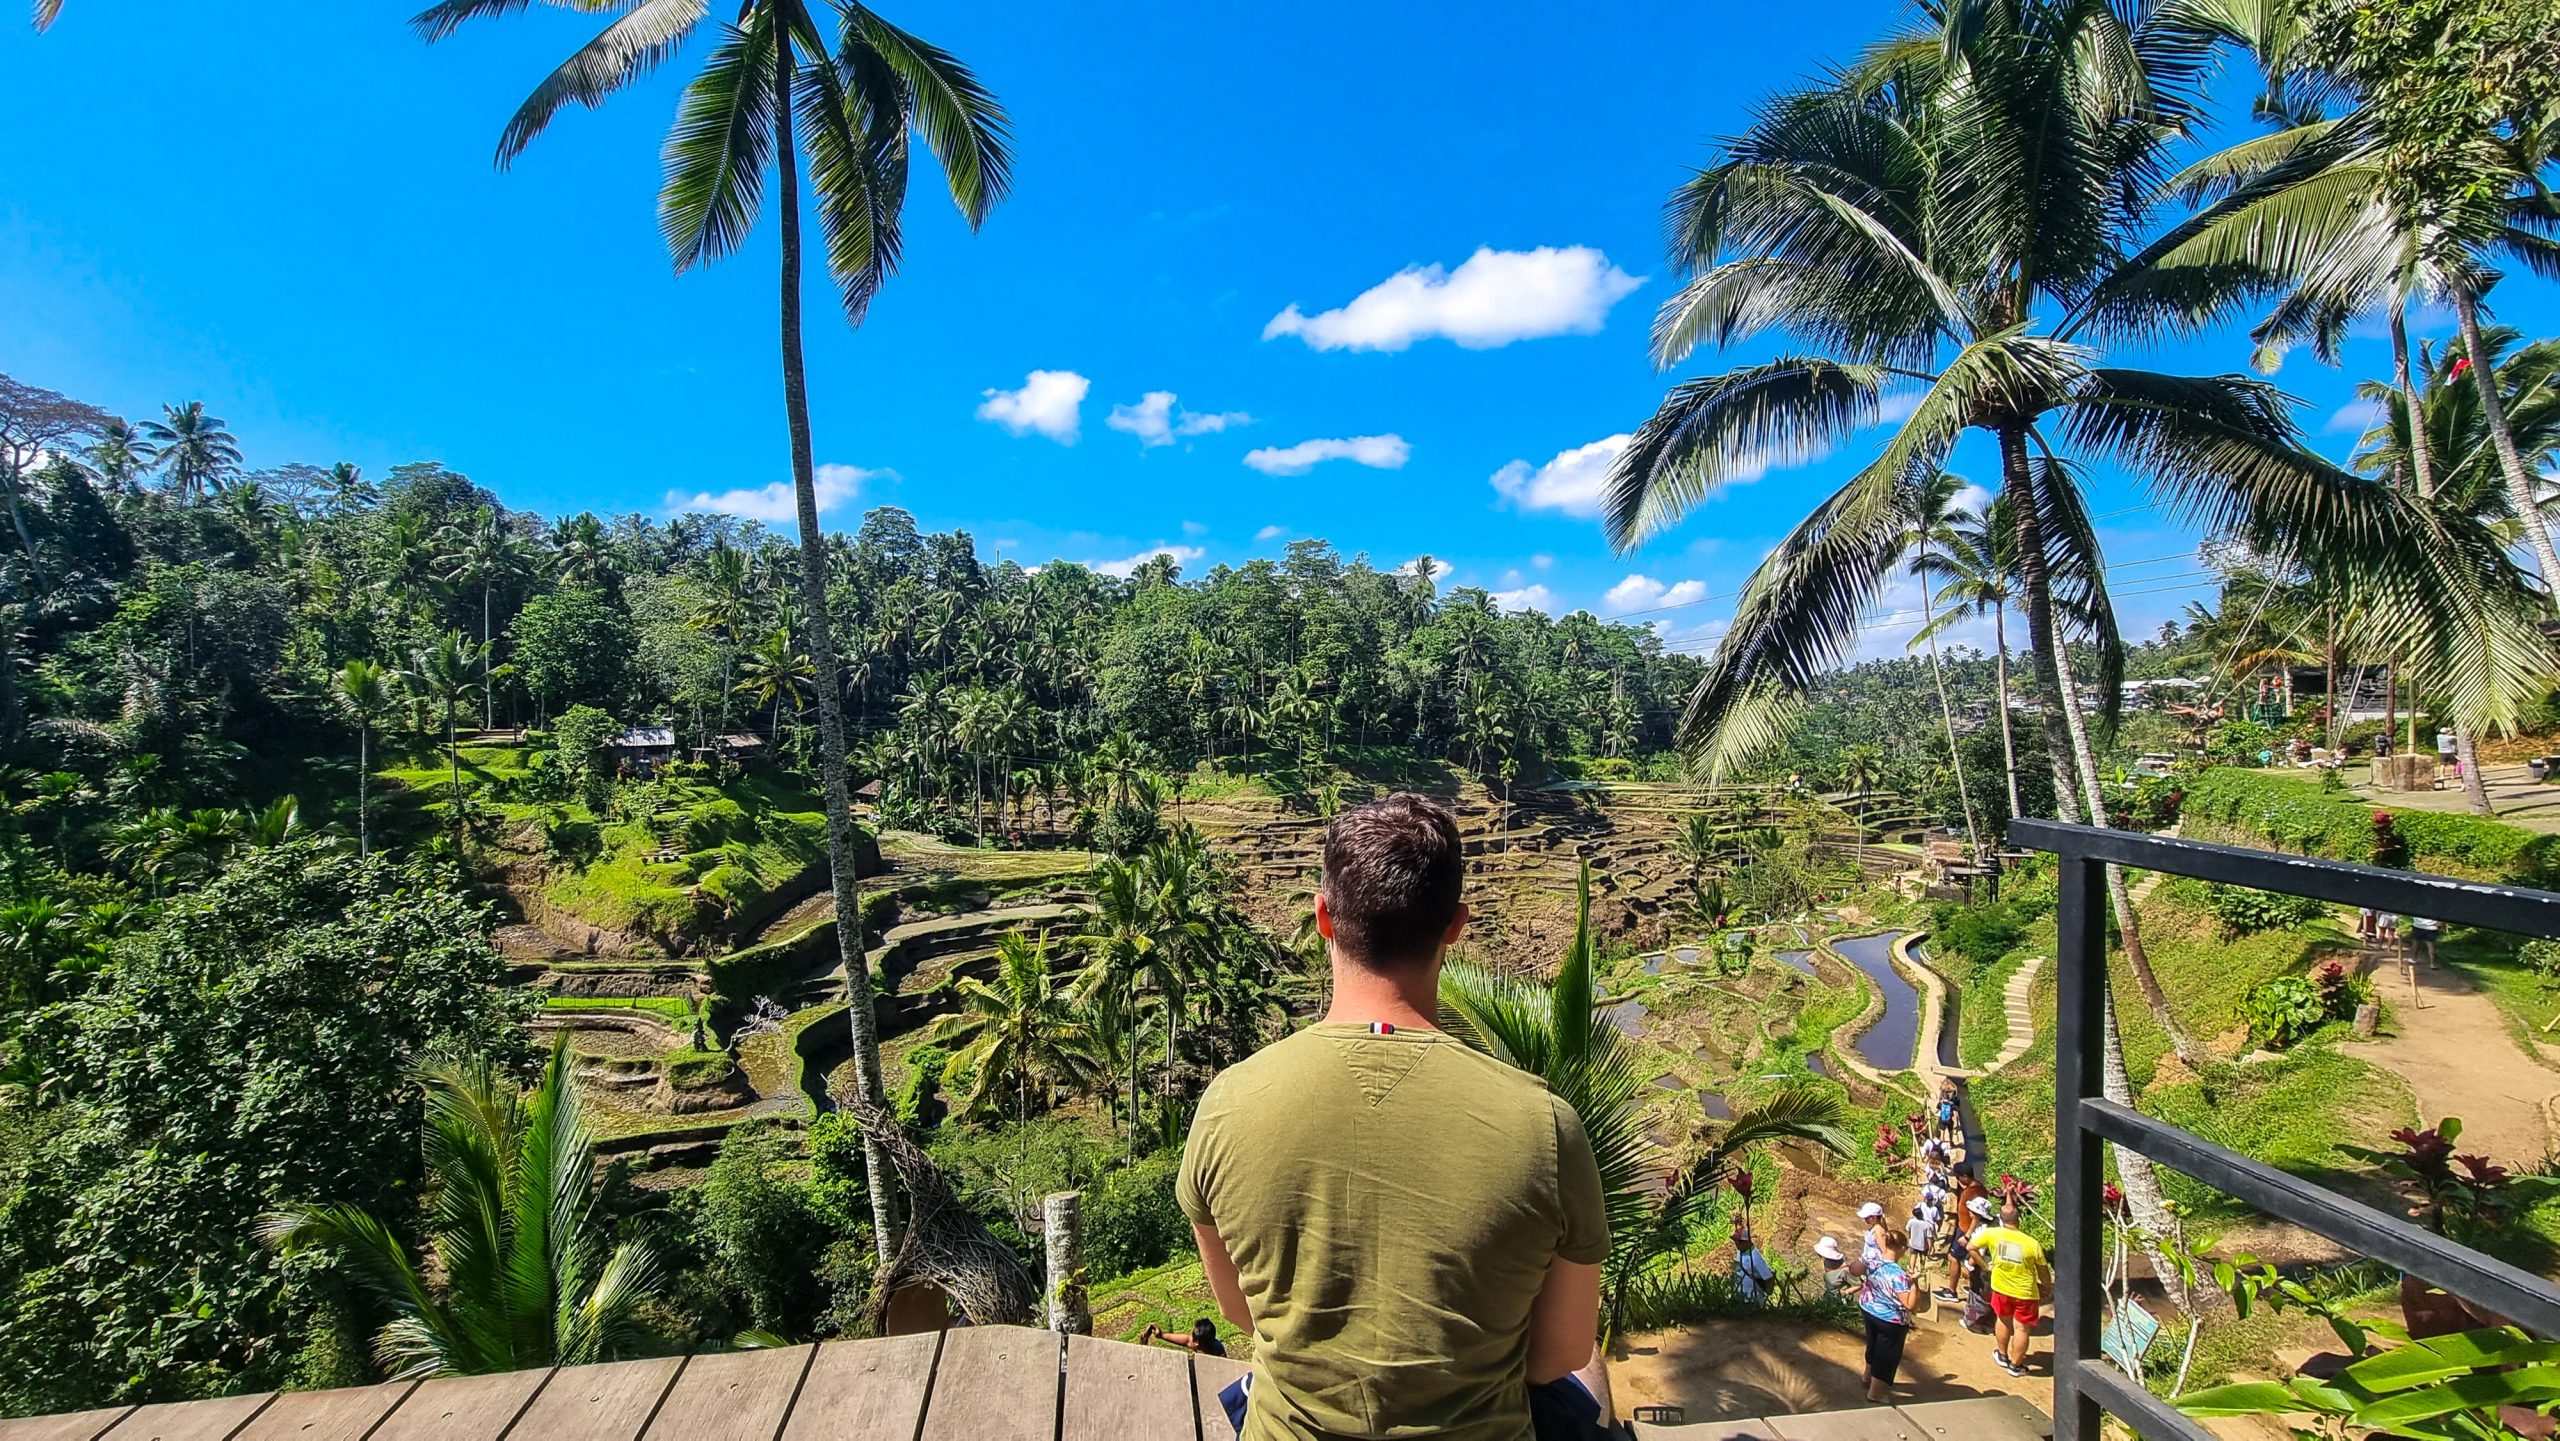 The Bali swings in Indonesia, the abian rice terraces